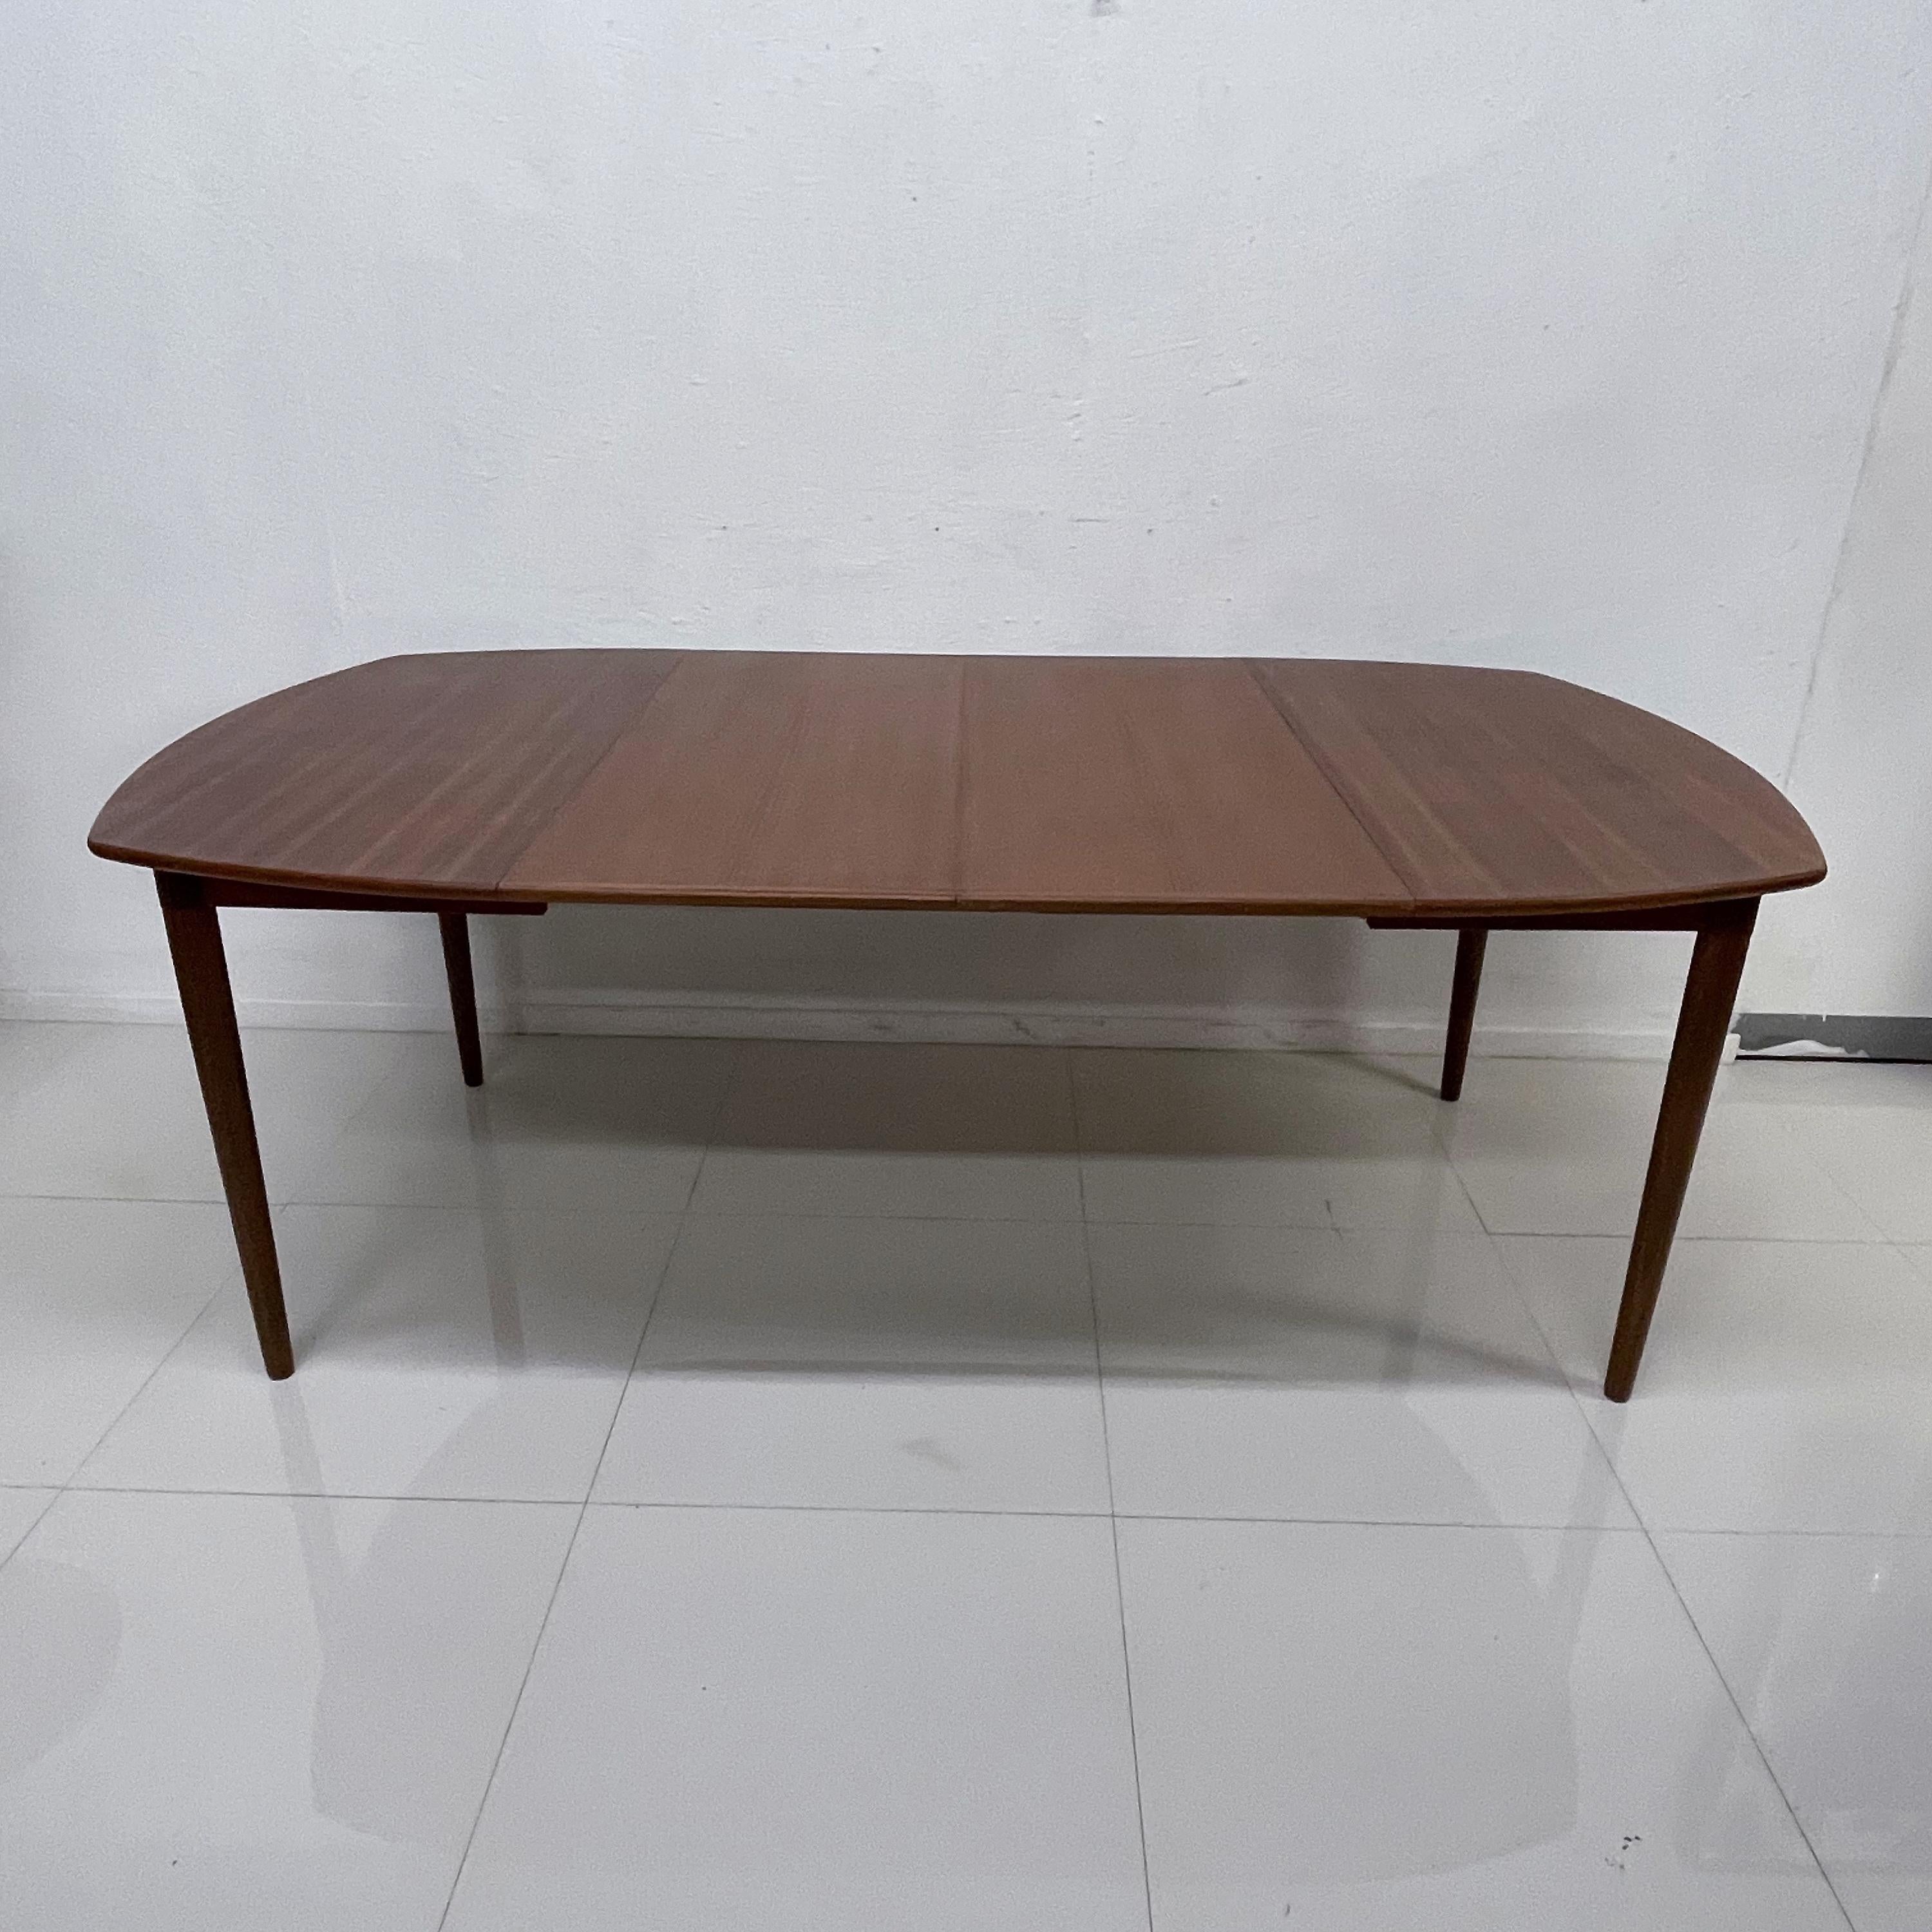 Restored Scandinavian Modern Teak Dining Table.
Versatile shape.
Tapered legs.
Two Extensions.
No stamp. Attribution Arne Vodder.
Firm and sturdy vintage. 
Original Vintage Preowned condition.
Refer to our images.
79 L Fully extended 61 with one